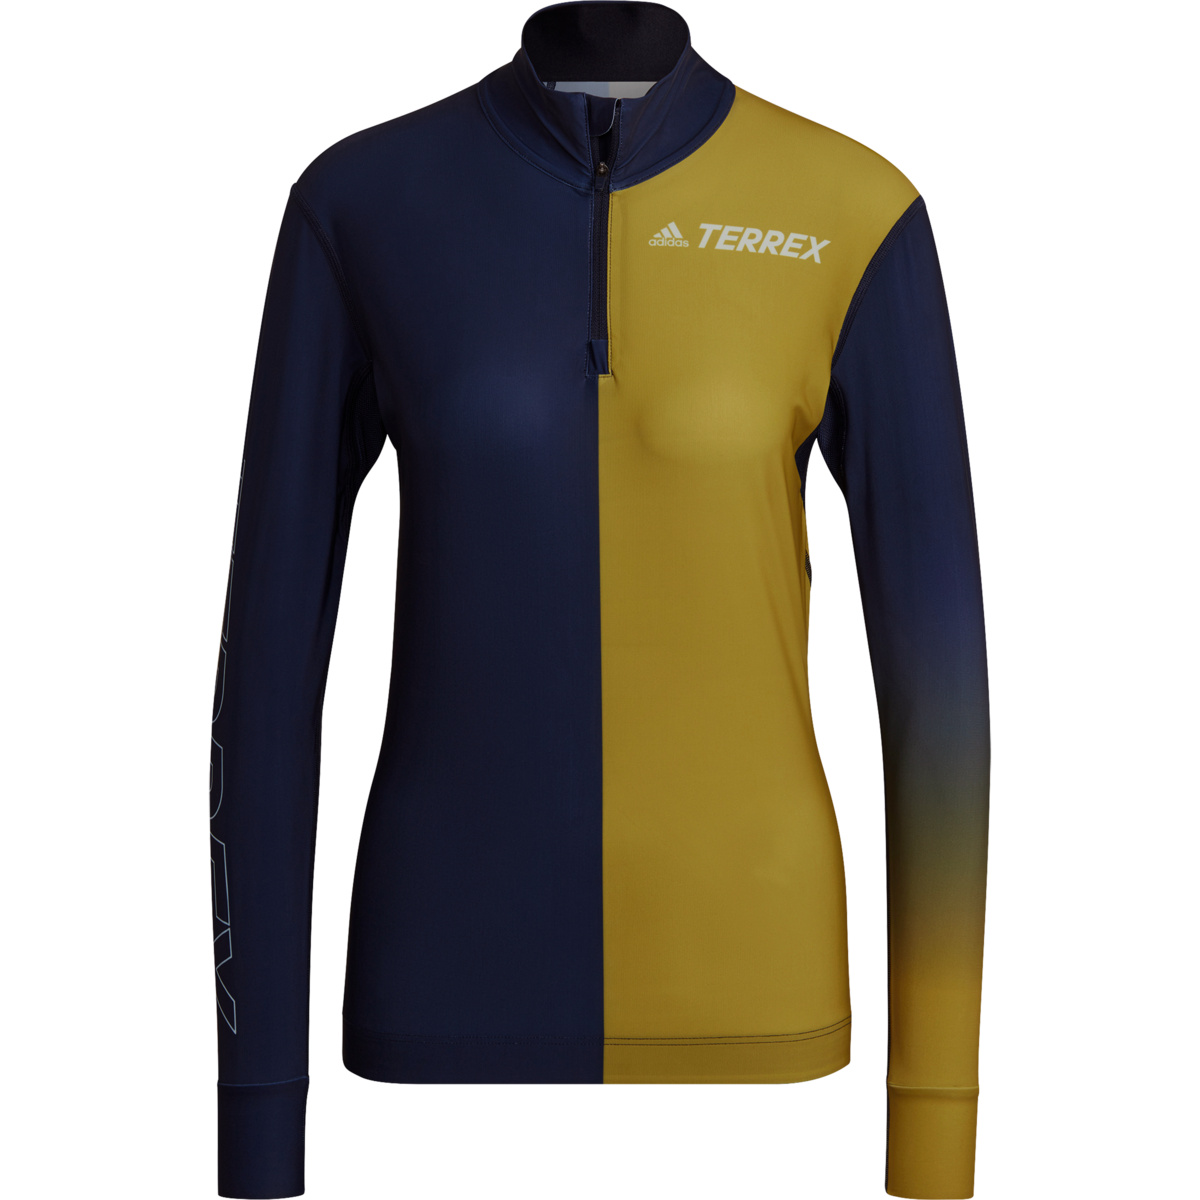 Image of adidas Terrex Donna Maglia a manica lunga XPR XC Race